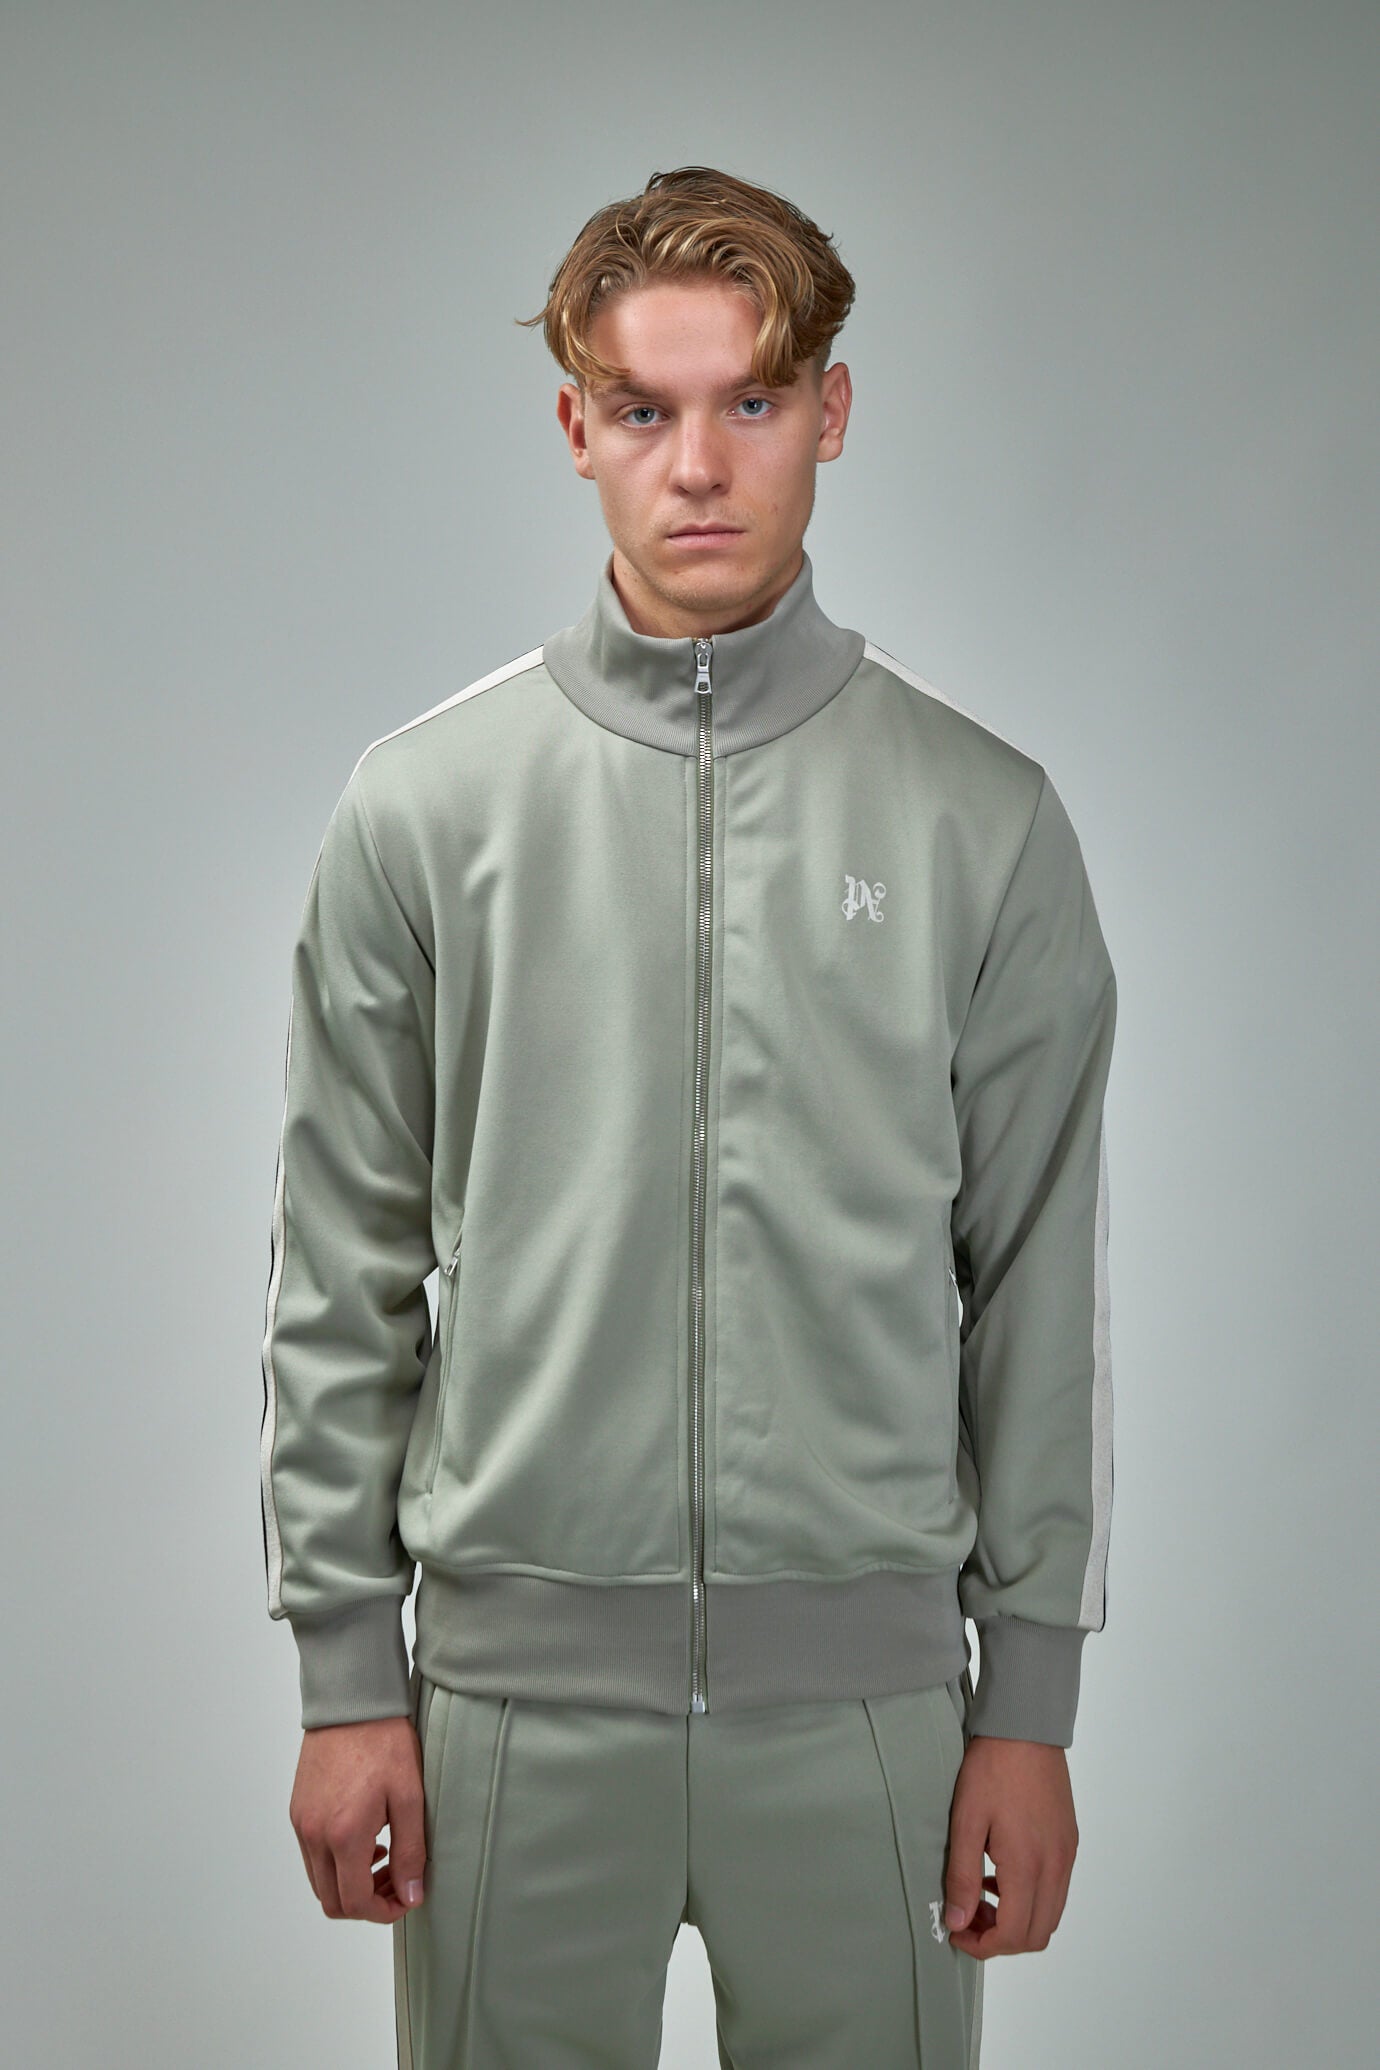 New Classic Track Jacket in grey - Palm Angels® Official